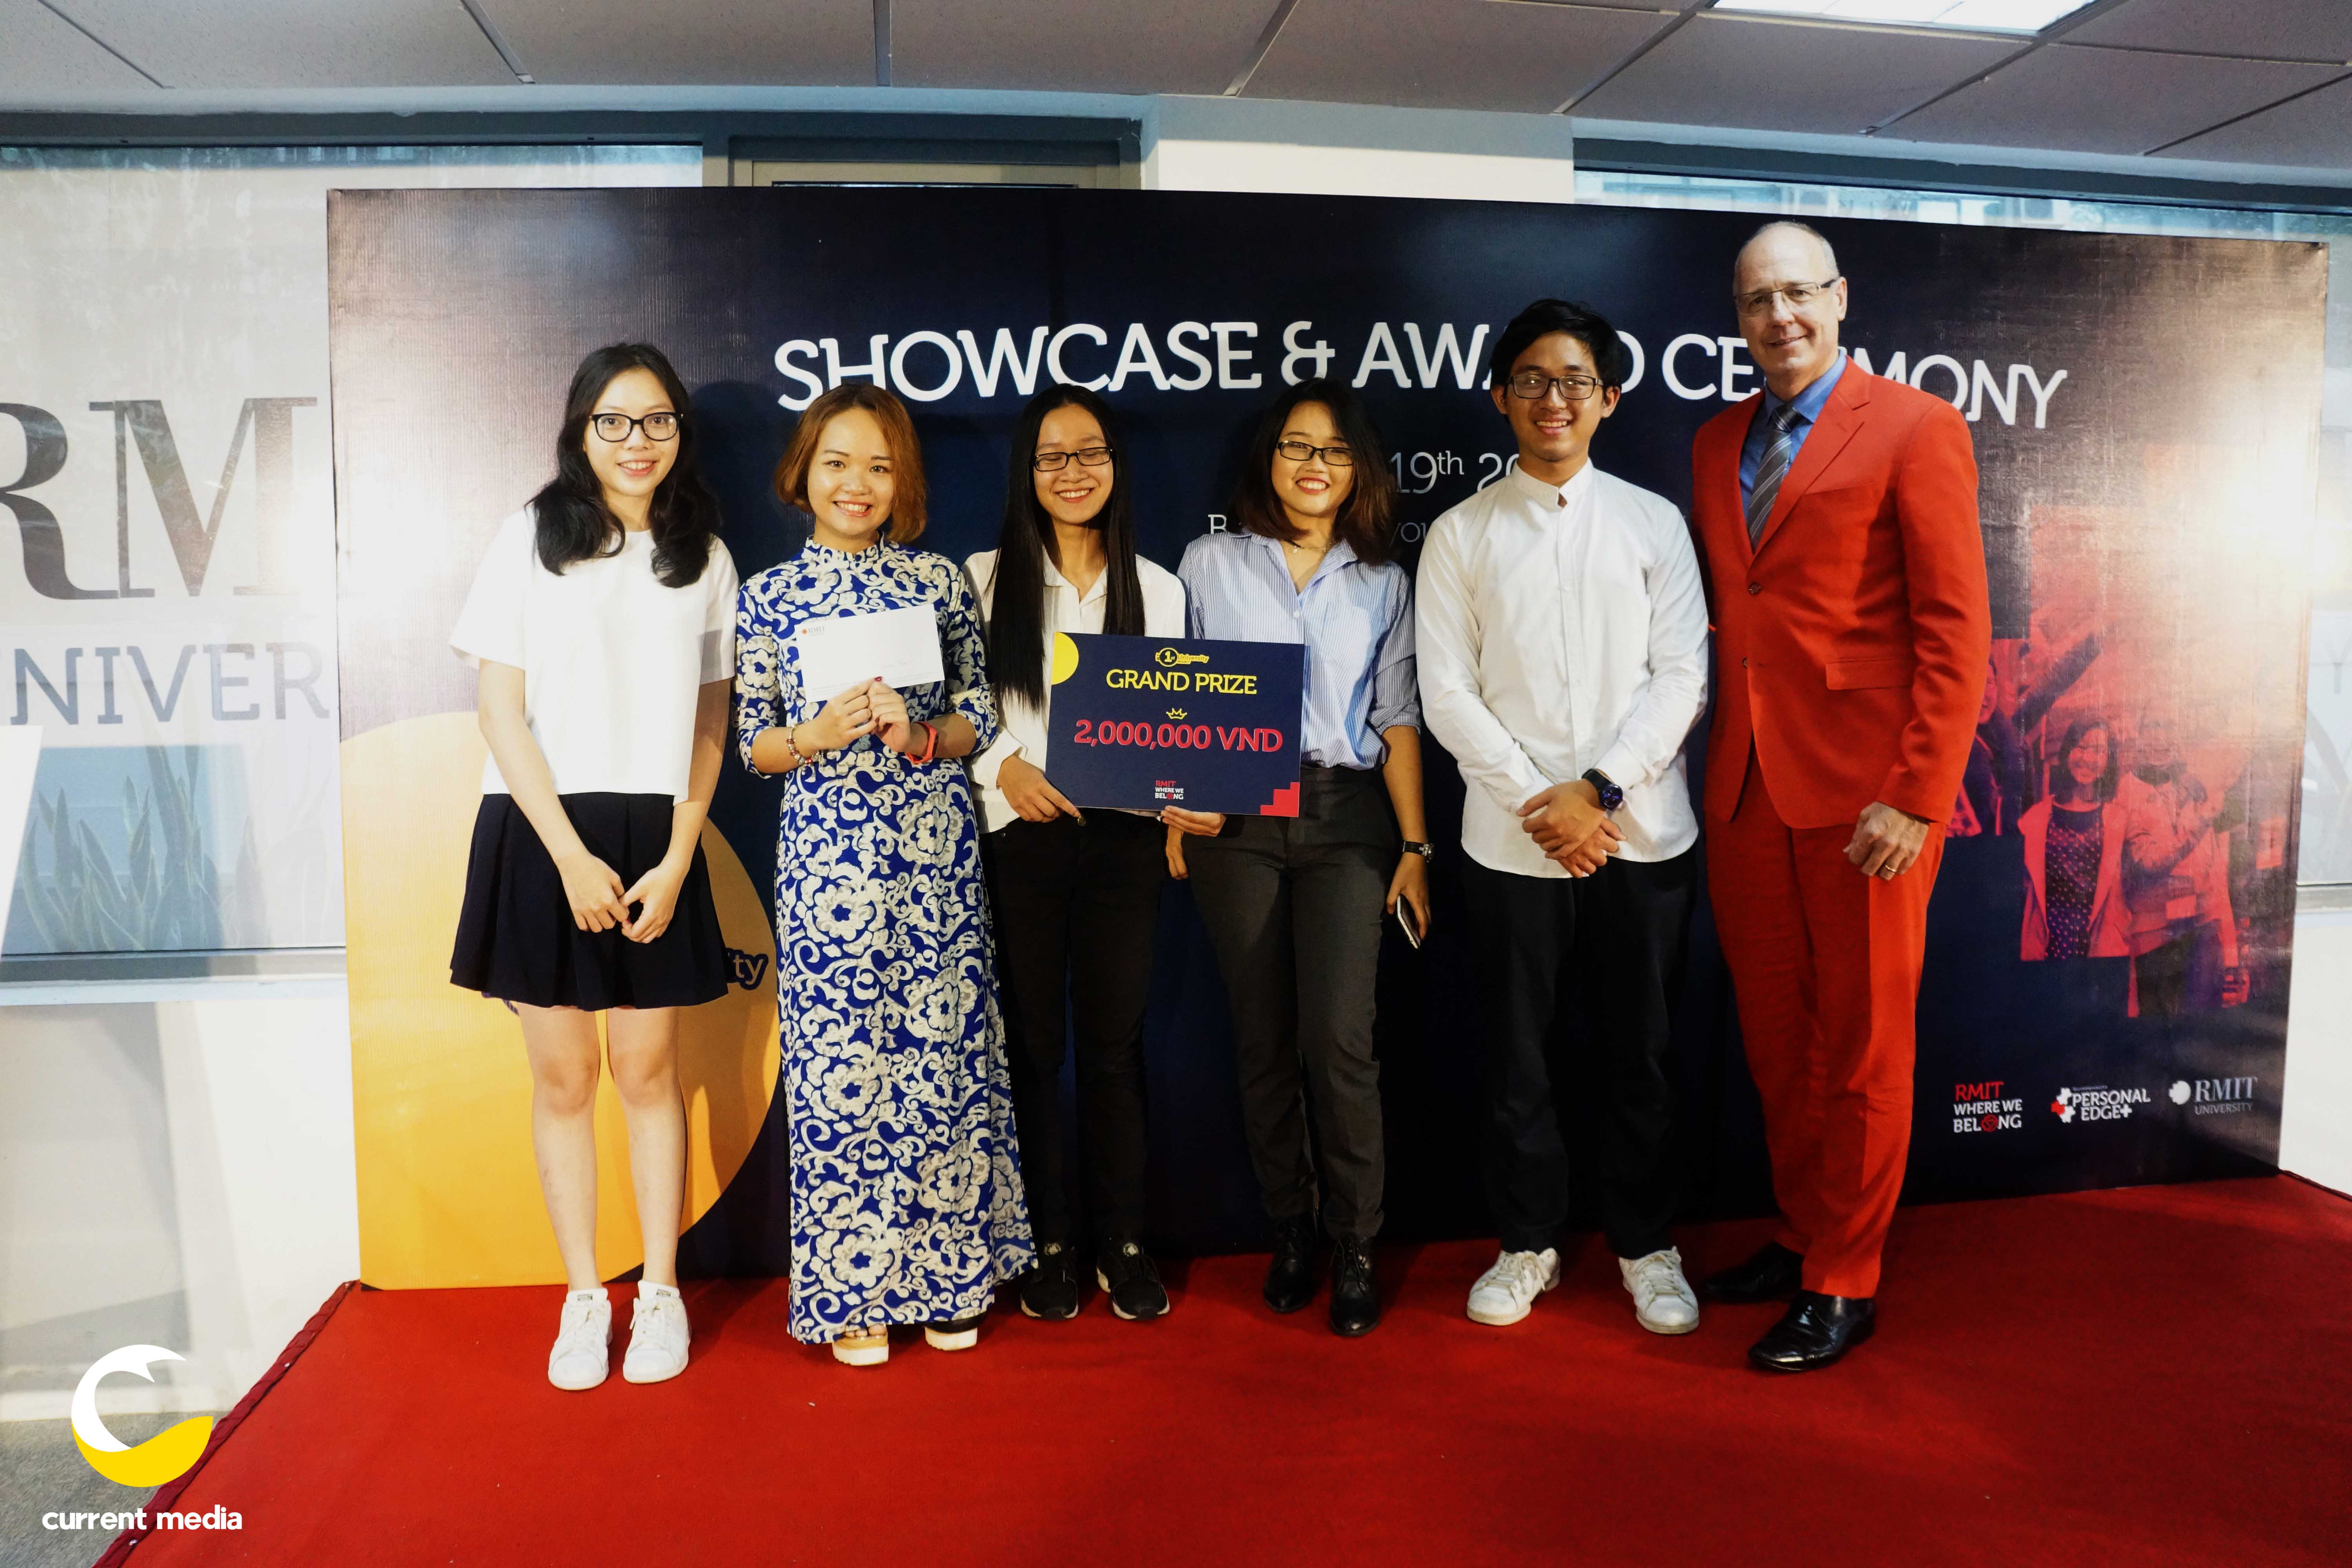 Wonder team from Hanoi campus won Grand Prize Award with the project entitled "Me after you"